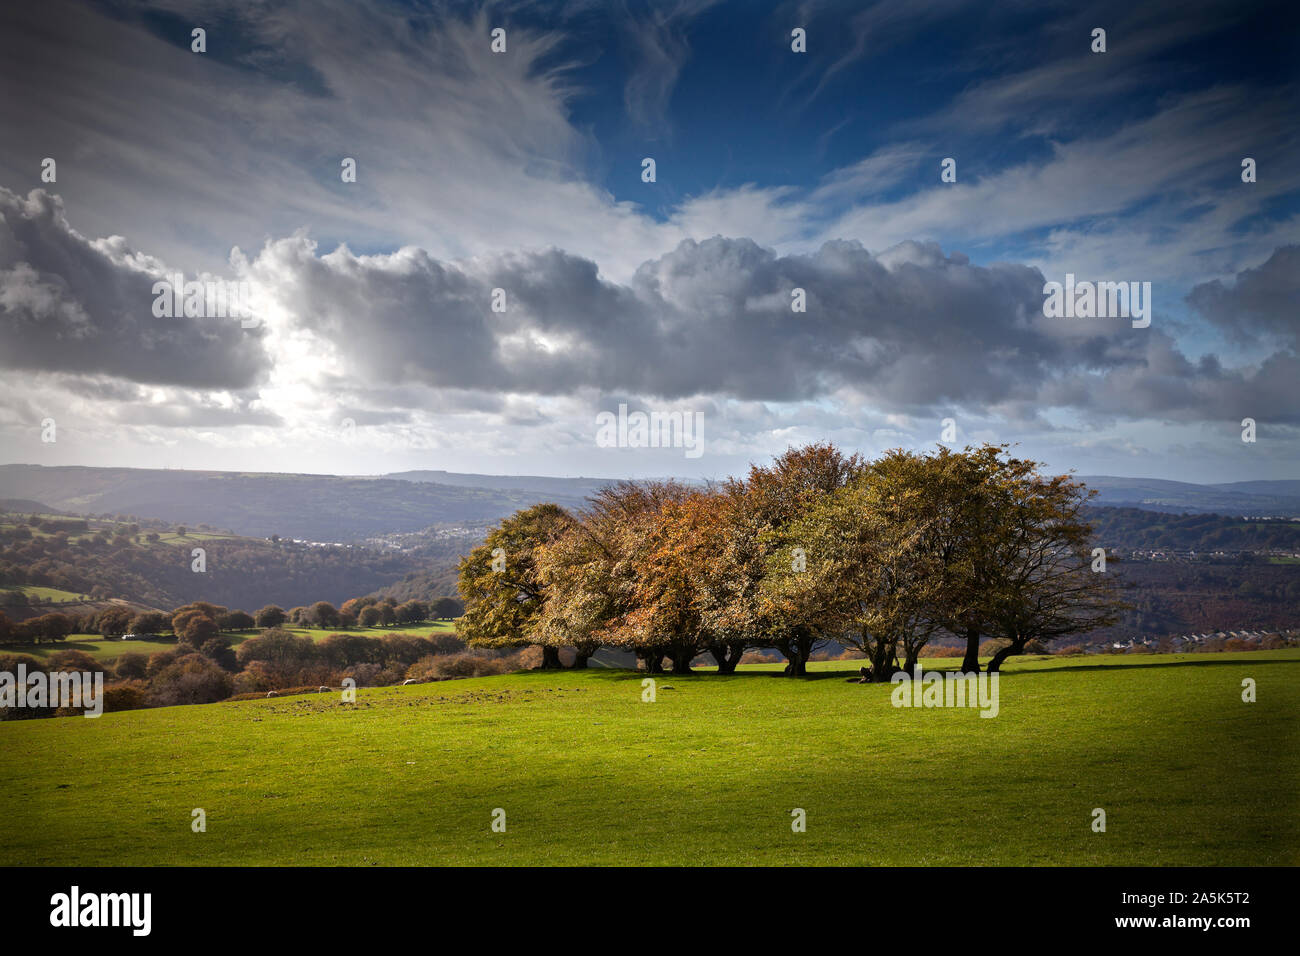 Small group of trees in Autumn colour on hillside with dramatic sky Stock Photo